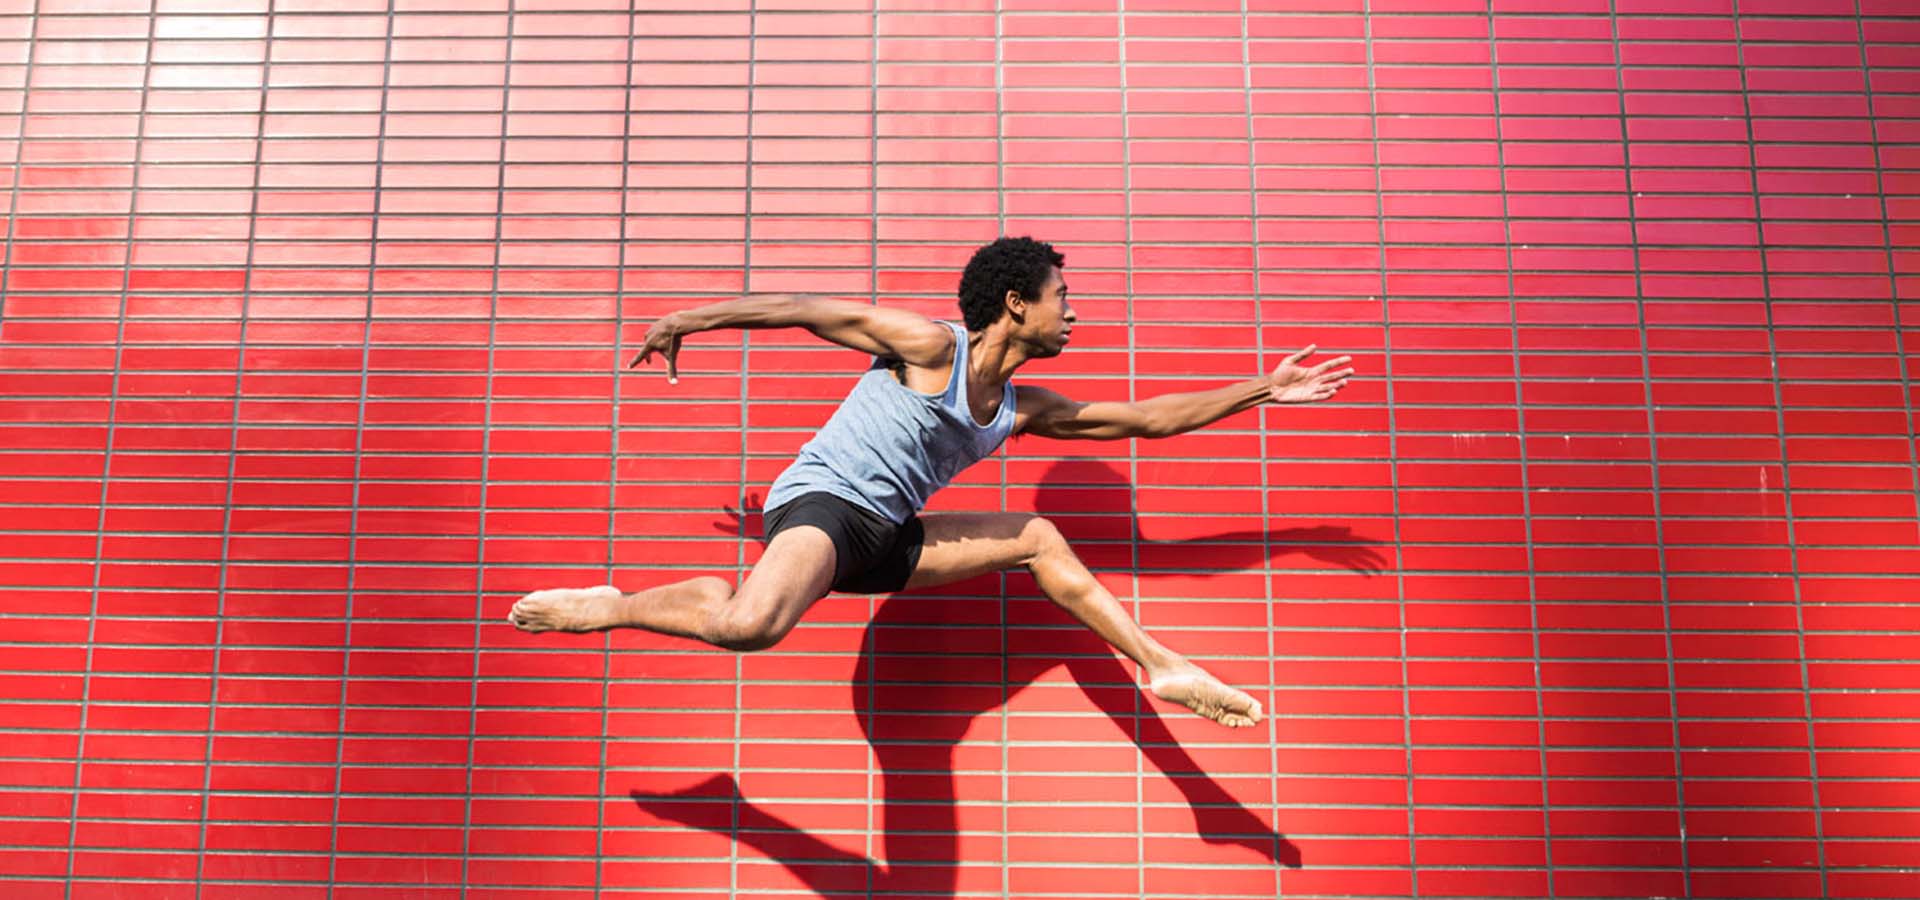 Male dancer doing a leap in front of a red tile building.